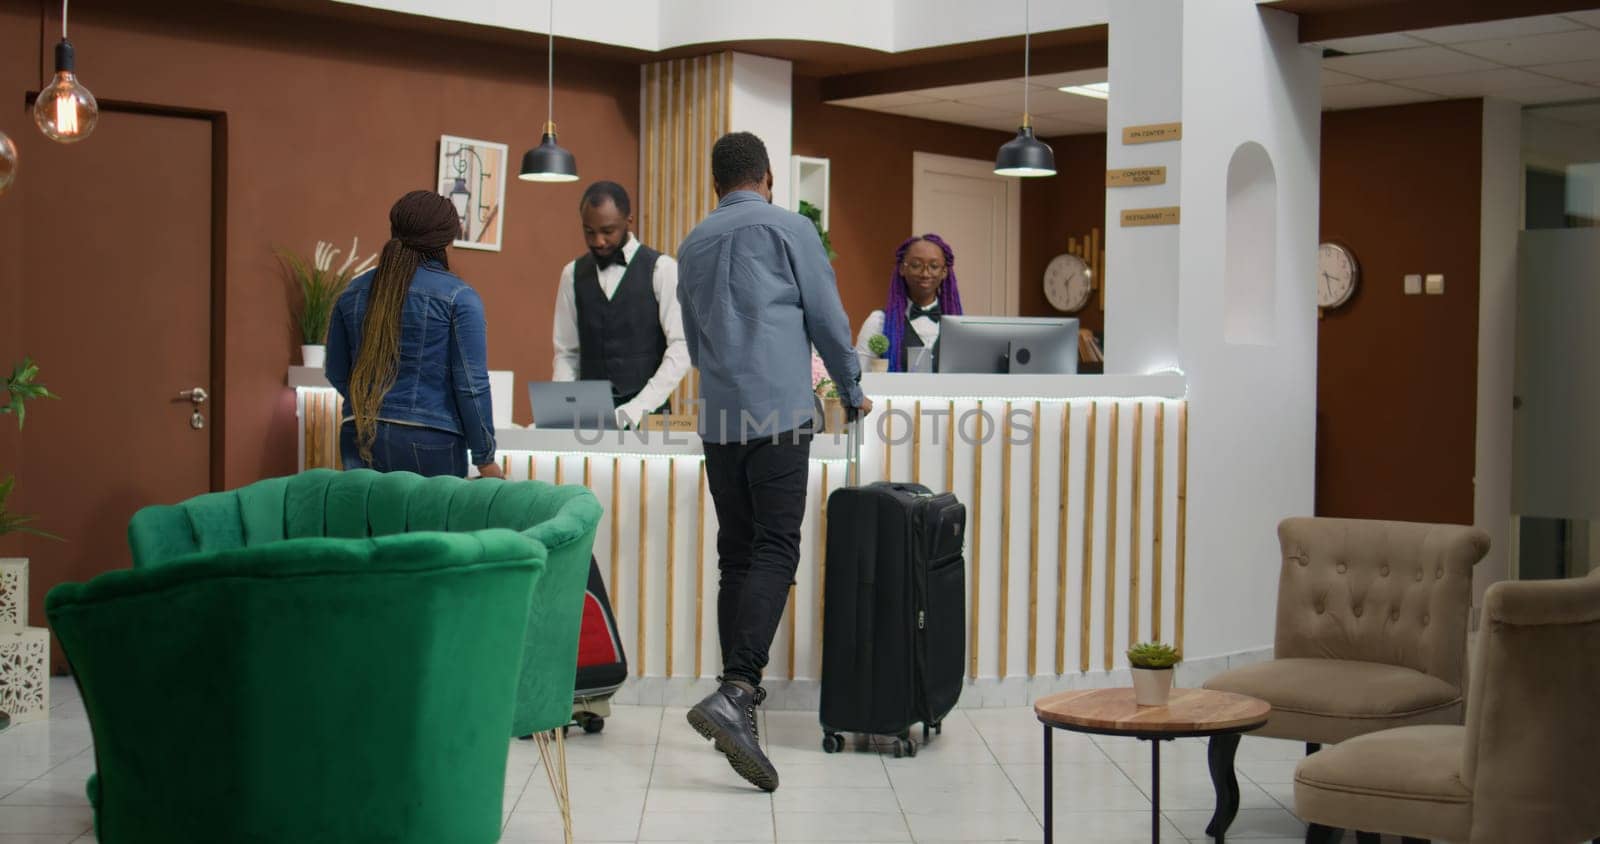 African american people arrive at hotel, talking to staff members about room booking and check in procedure. Man and woman arriving in lobby with trolley bags, honeymoon trip.